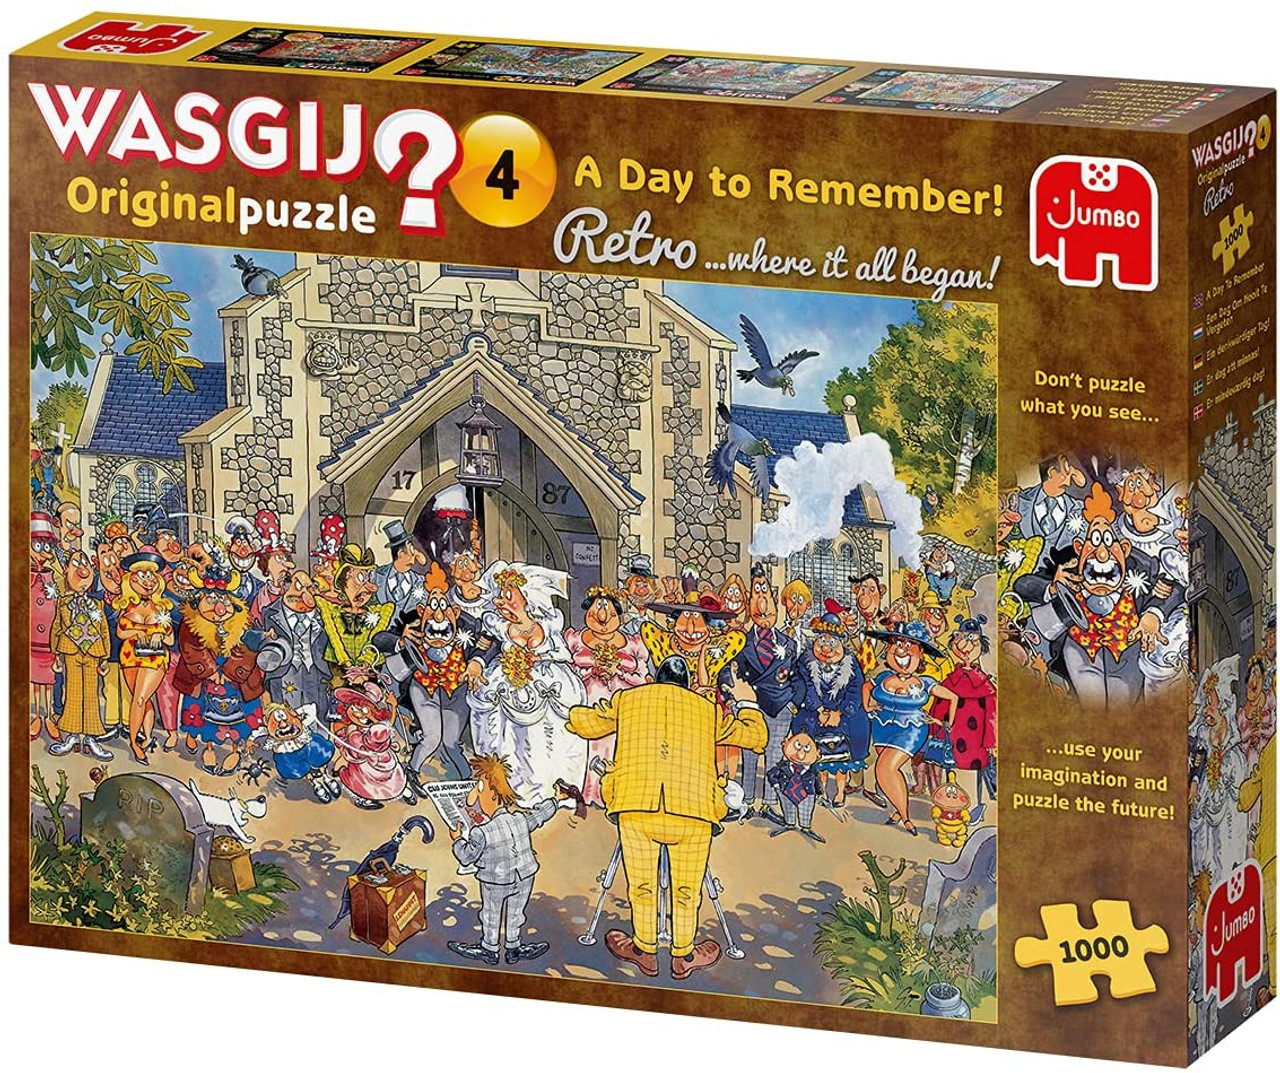 tyfoon boog is genoeg A Day to Remember" JVH *WASGIJ Original #4* 1000 Piece Jigsaw Puzzle |  Jumbo - Tri-M Specialty Products